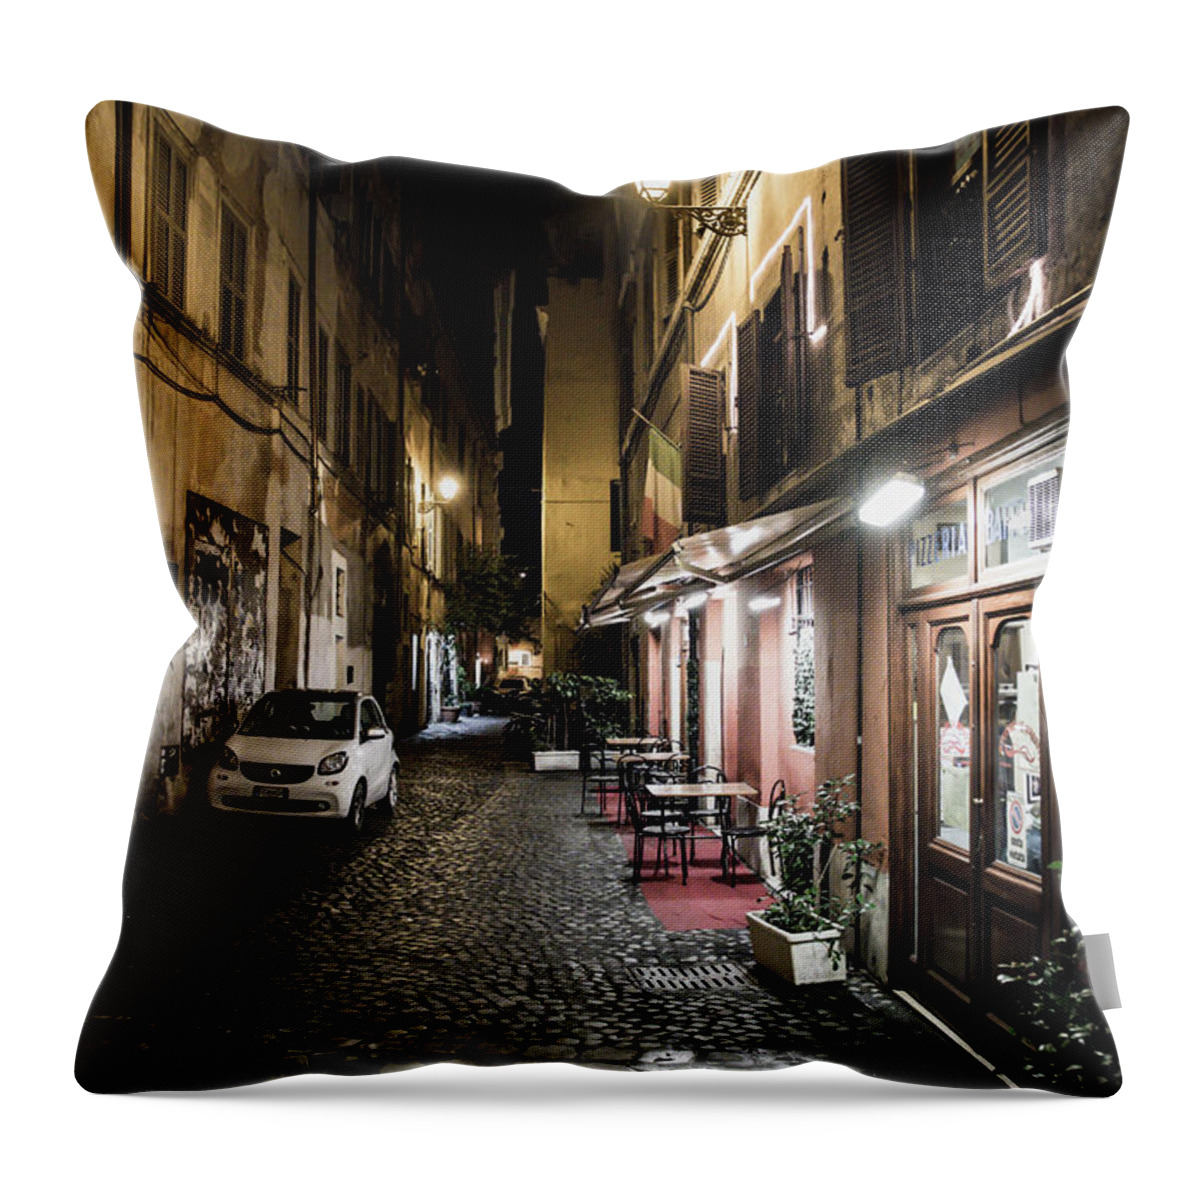 Italy Throw Pillow featuring the photograph Pizzeria in Abandoned Street at Night in Rome in Italy by Andreas Berthold